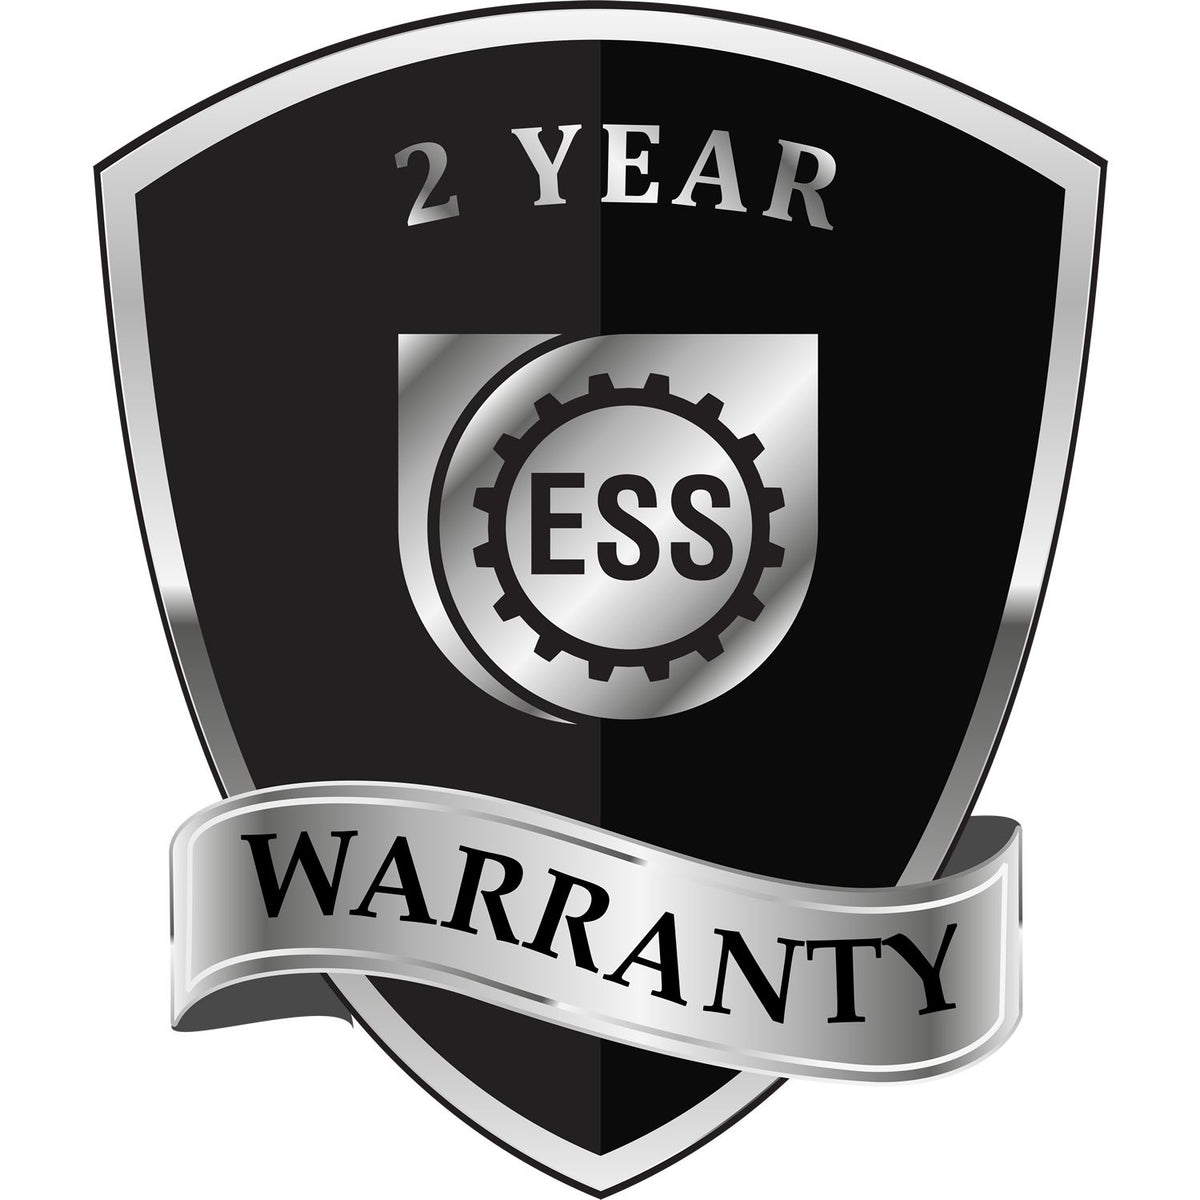 A black and silver badge or emblem showing warranty information for the Hybrid Mississippi Architect Seal